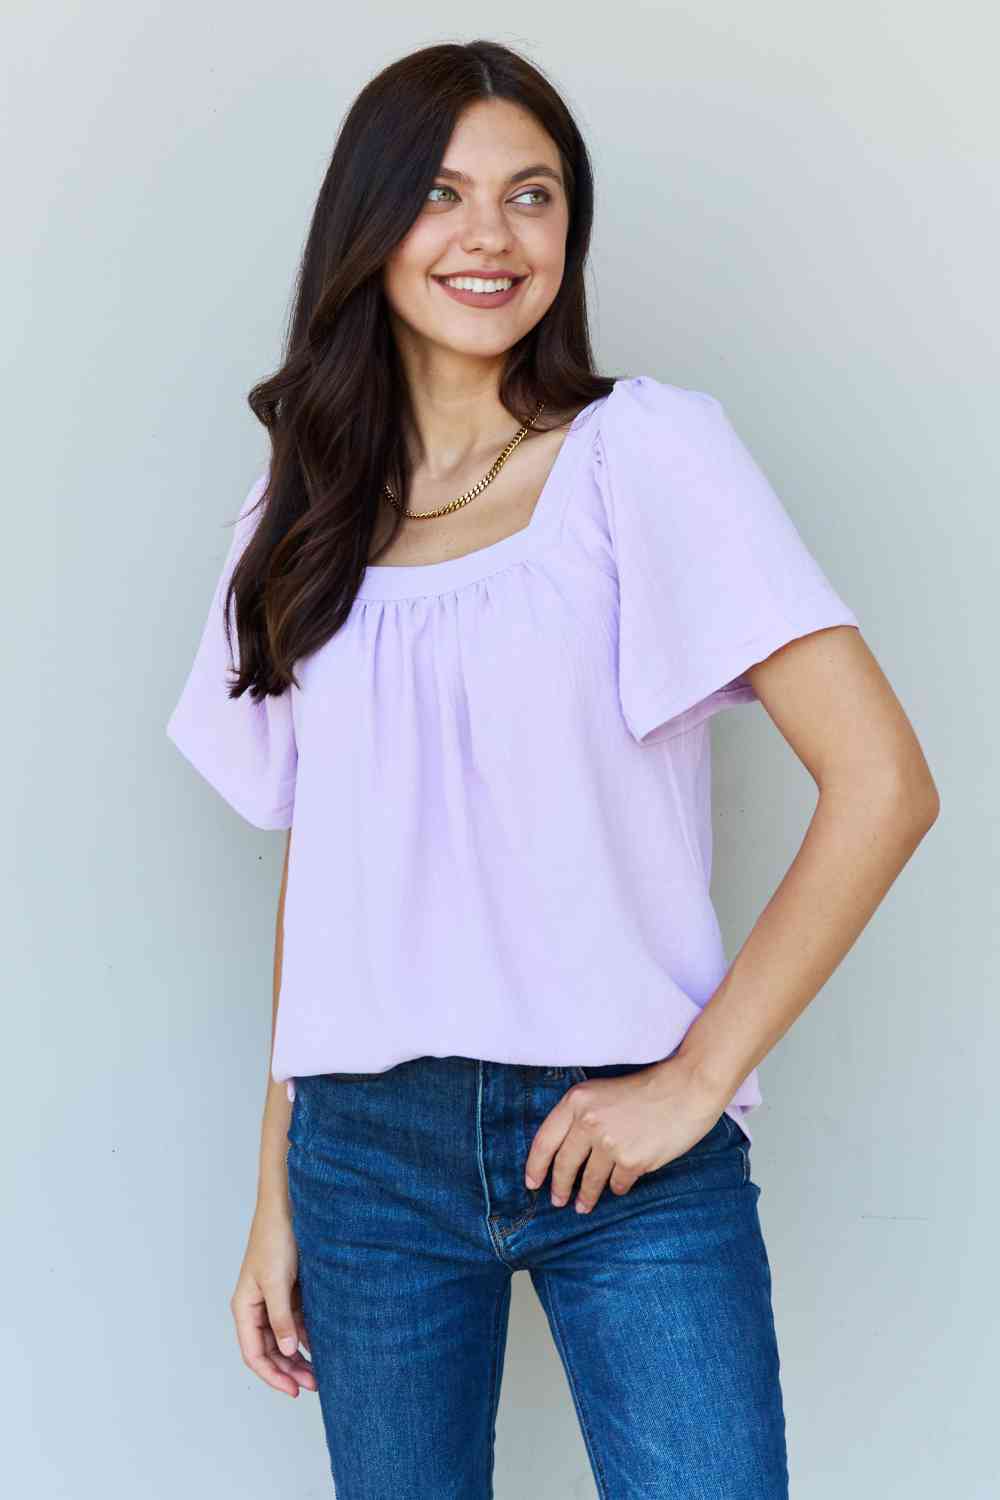 Ninexis Keep Me Close Square Neck Short Sleeve Blouse in Lavender Ti Amo I love you